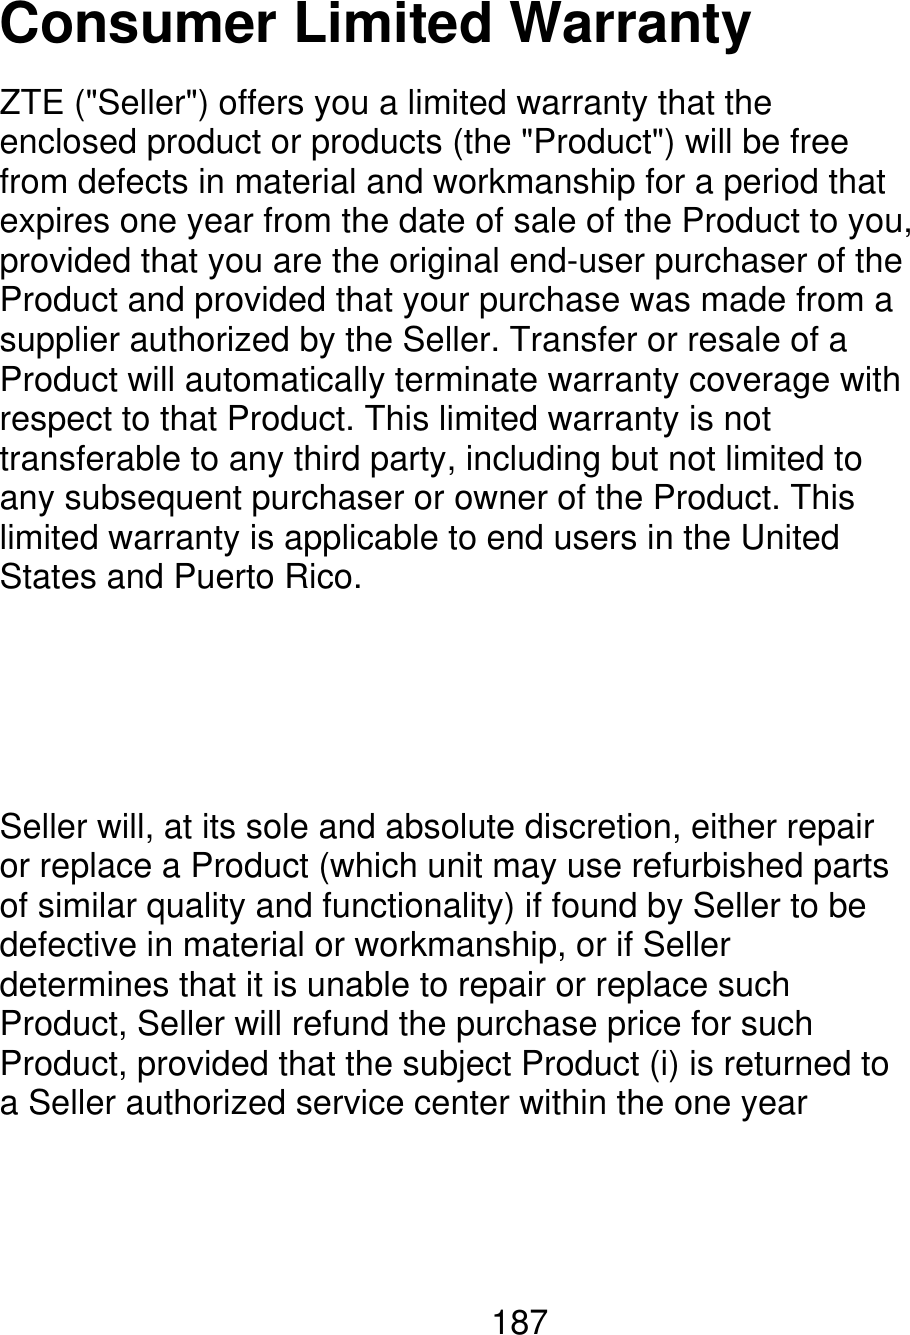 Consumer Limited Warranty ZTE (&quot;Seller&quot;) offers you a limited warranty that the enclosed product or products (the &quot;Product&quot;) will be free from defects in material and workmanship for a period that expires one year from the date of sale of the Product to you, provided that you are the original end-user purchaser of the Product and provided that your purchase was made from a supplier authorized by the Seller. Transfer or resale of a Product will automatically terminate warranty coverage with respect to that Product. This limited warranty is not transferable to any third party, including but not limited to any subsequent purchaser or owner of the Product. This limited warranty is applicable to end users in the United States and Puerto Rico. Seller will, at its sole and absolute discretion, either repair or replace a Product (which unit may use refurbished parts of similar quality and functionality) if found by Seller to be defective in material or workmanship, or if Seller determines that it is unable to repair or replace such Product, Seller will refund the purchase price for such Product, provided that the subject Product (i) is returned to a Seller authorized service center within the one year 187 